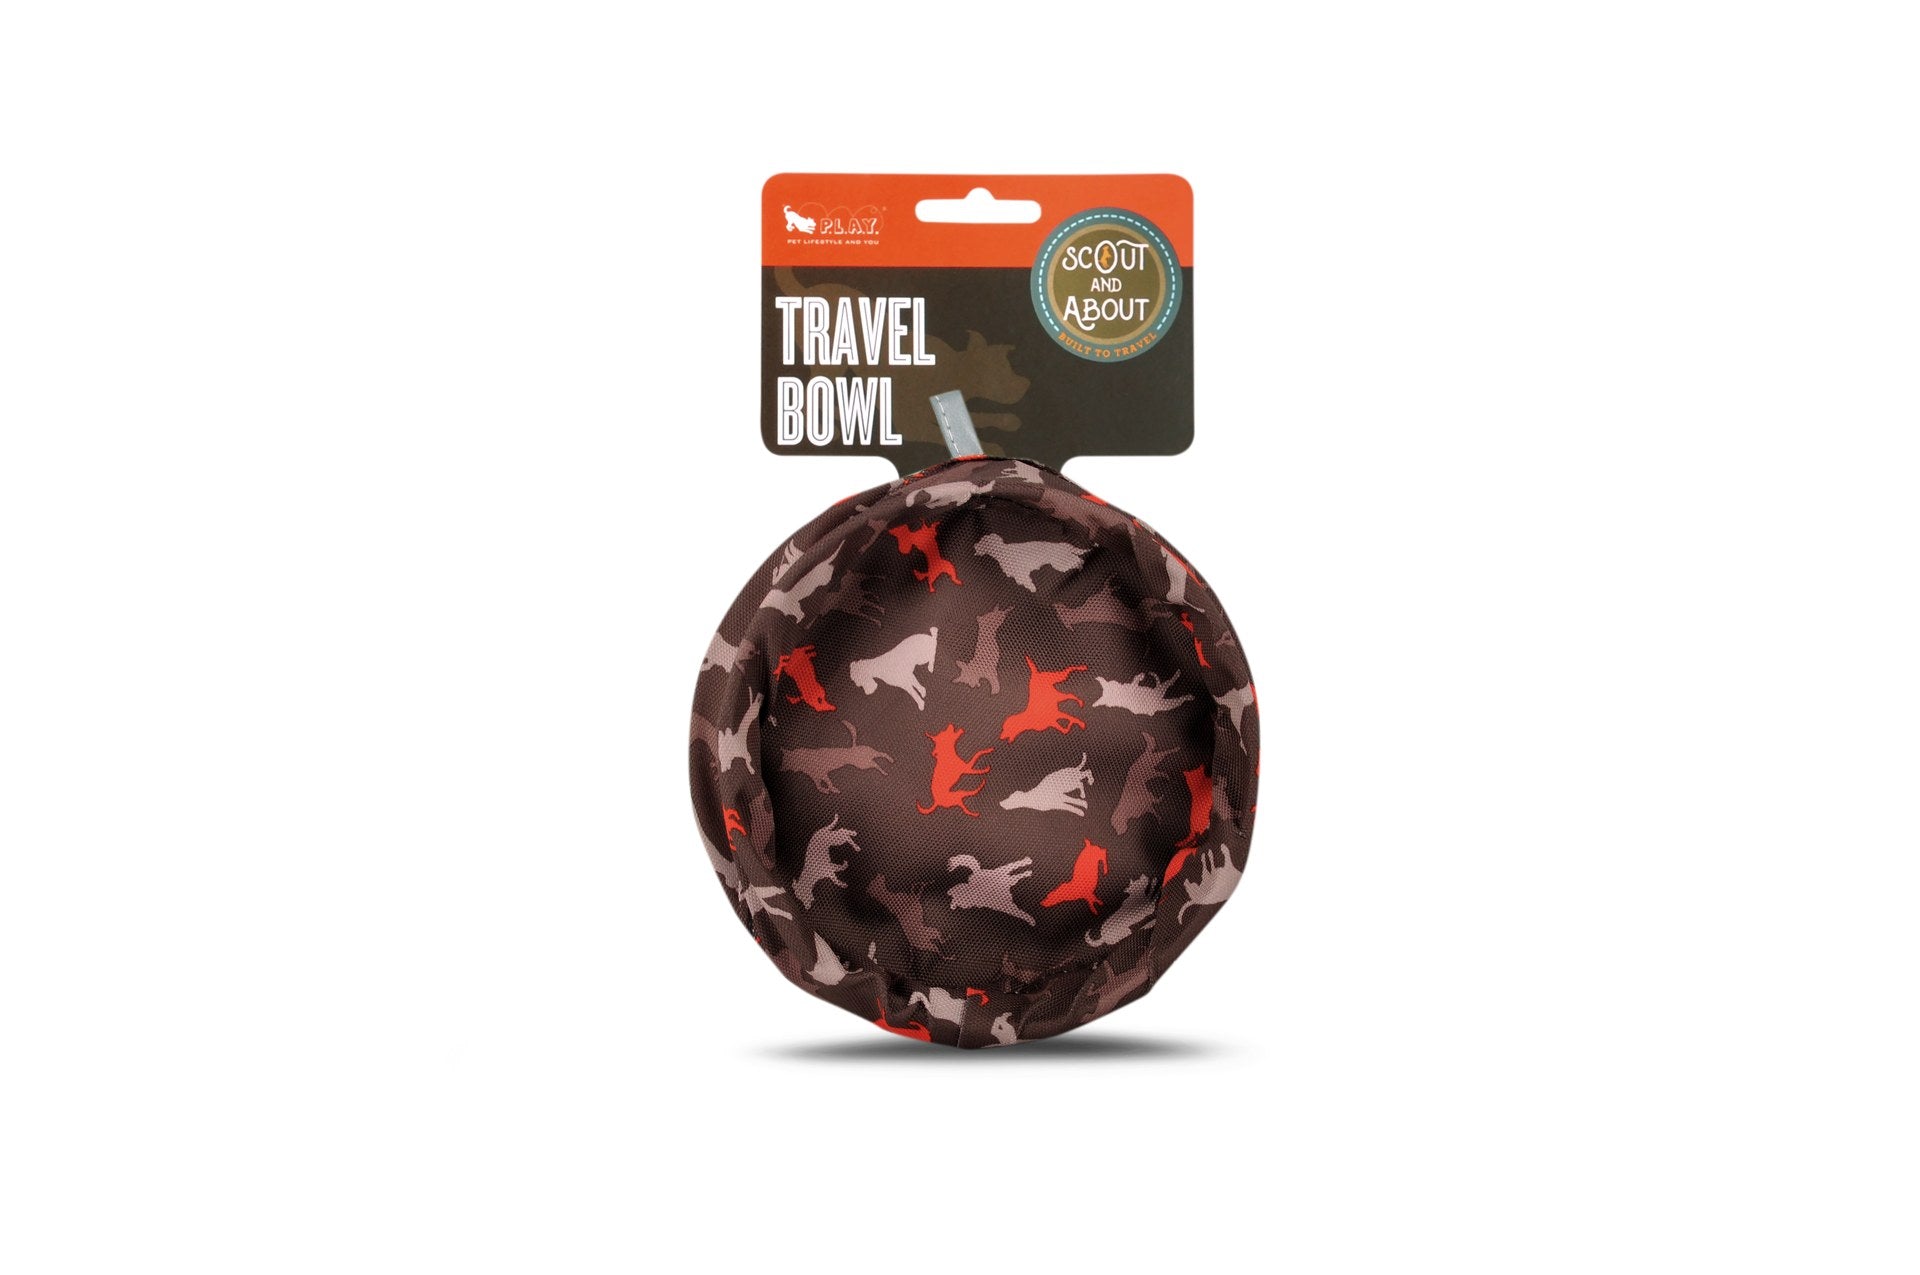 Scout & About Travel Bowl